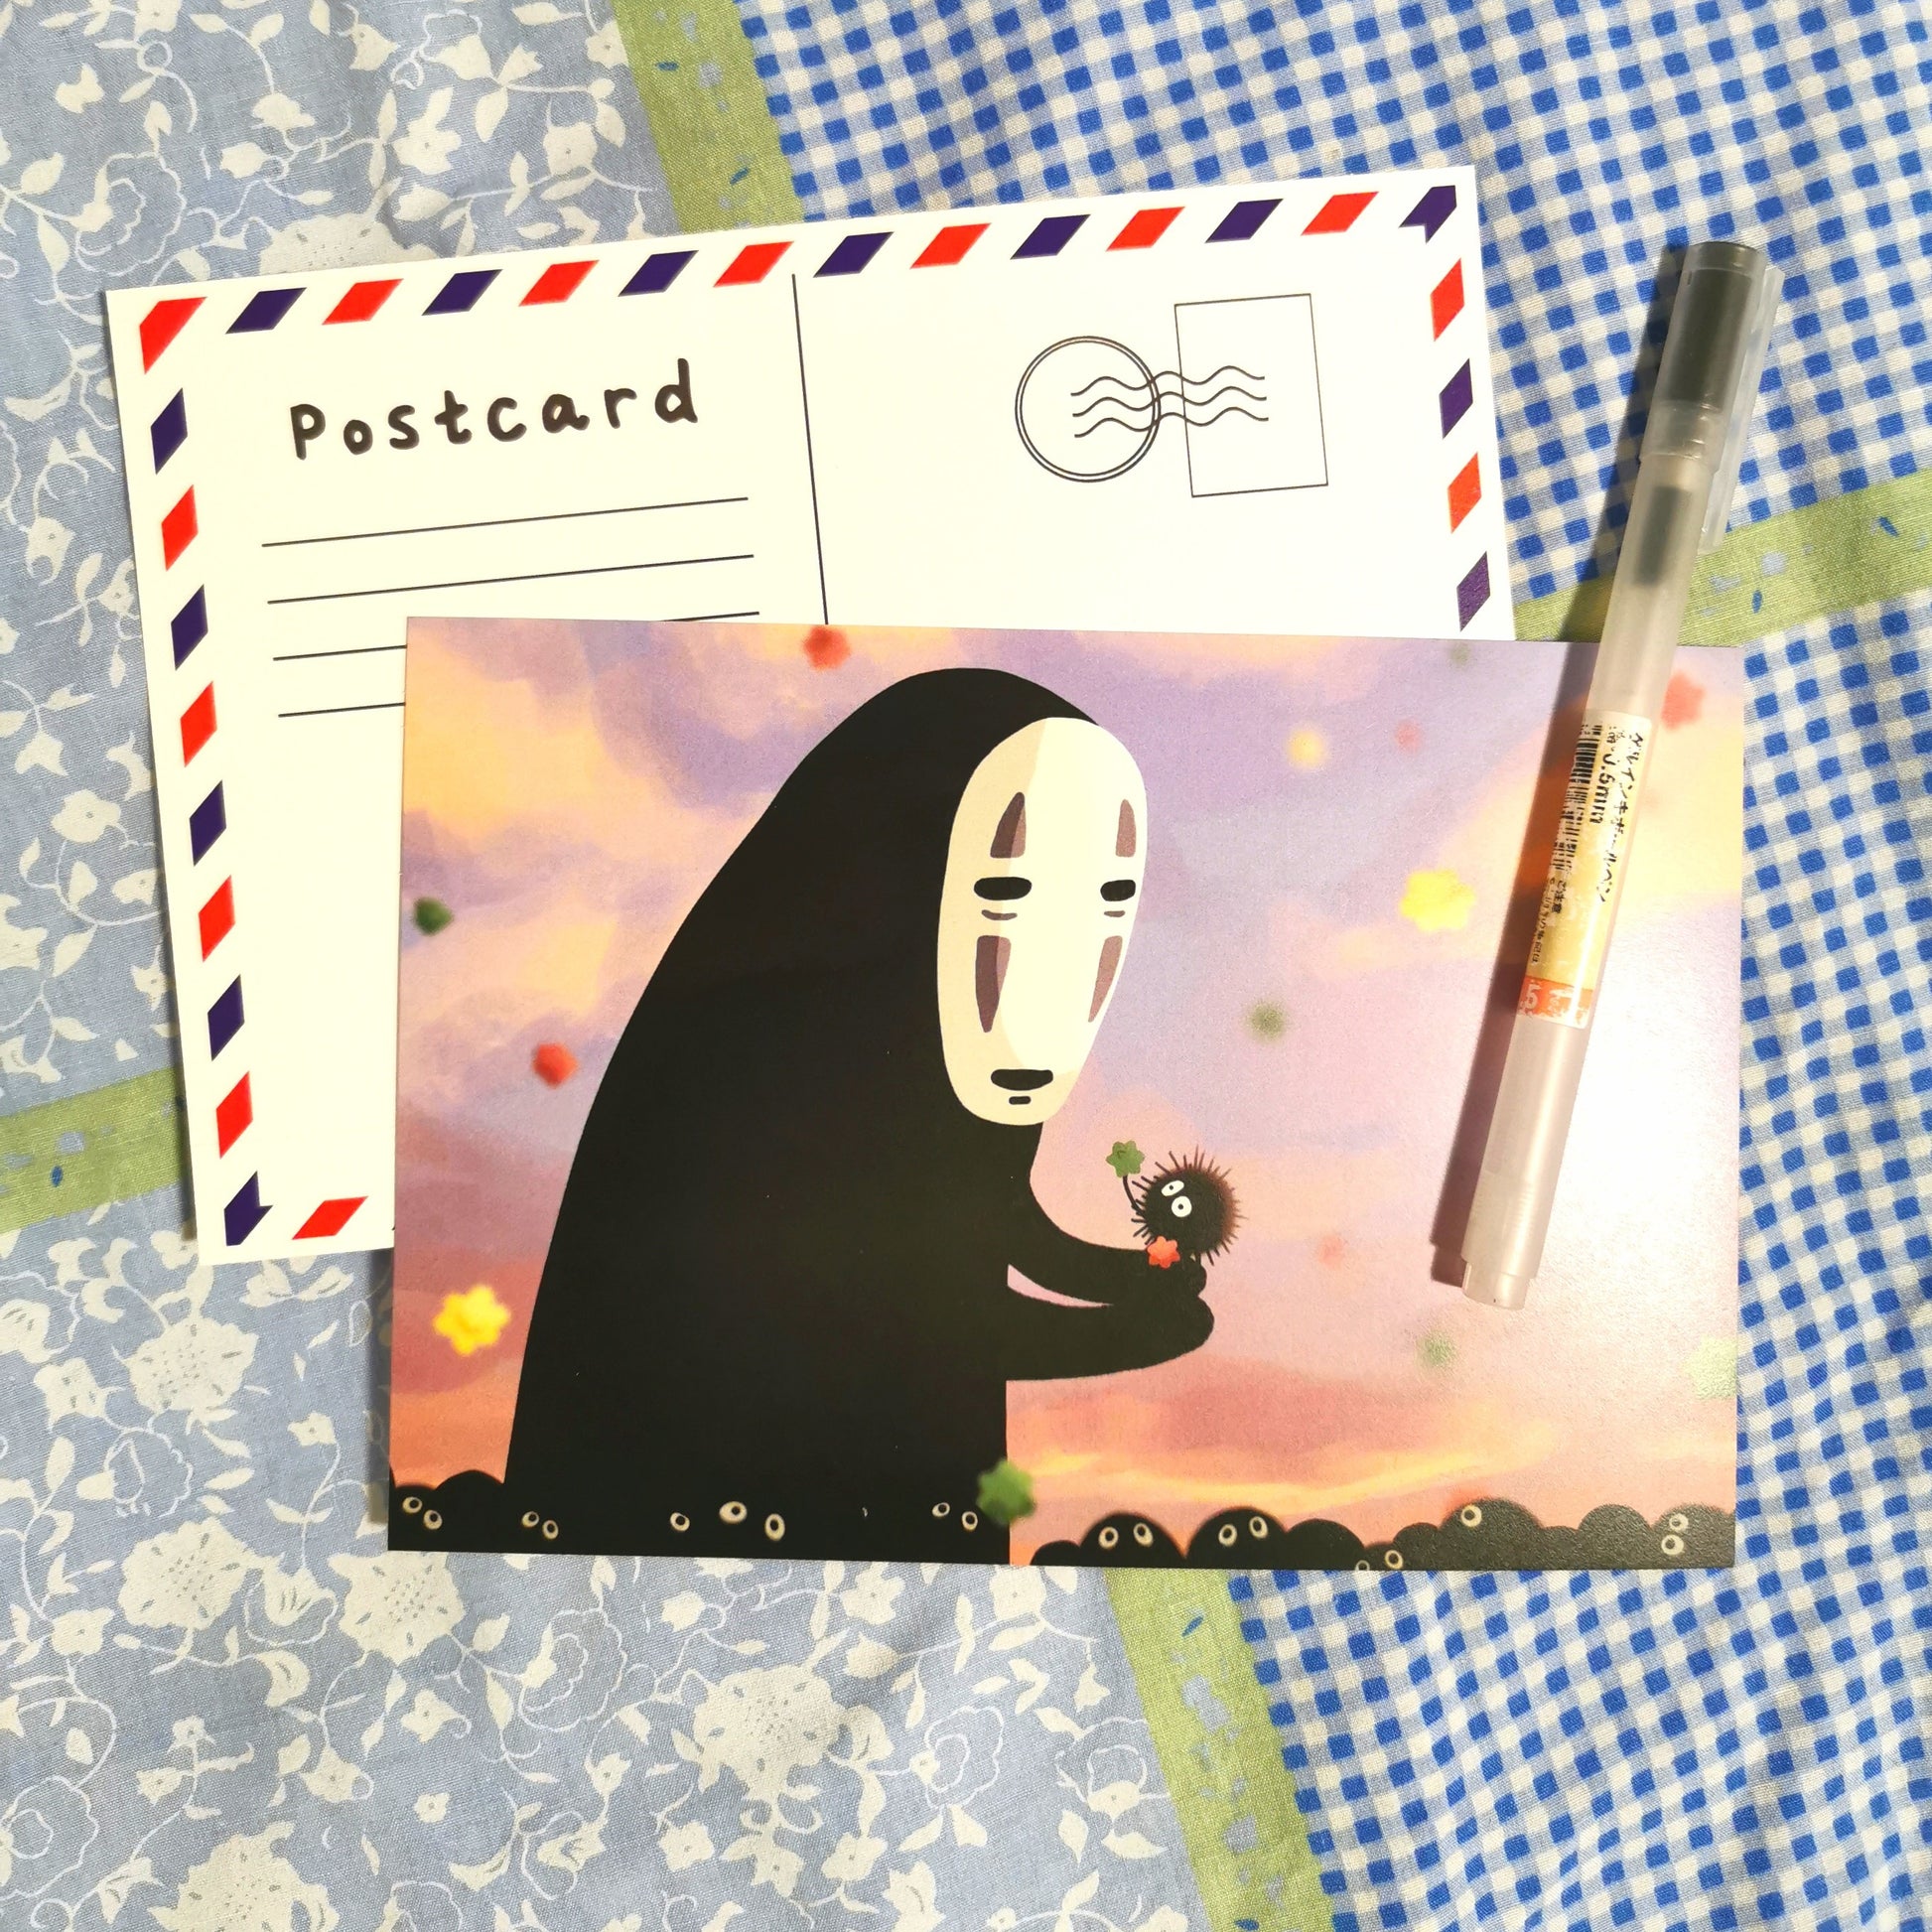 Got some Ghibli postcards for my b-day. Decided to put them on my door : r/ ghibli